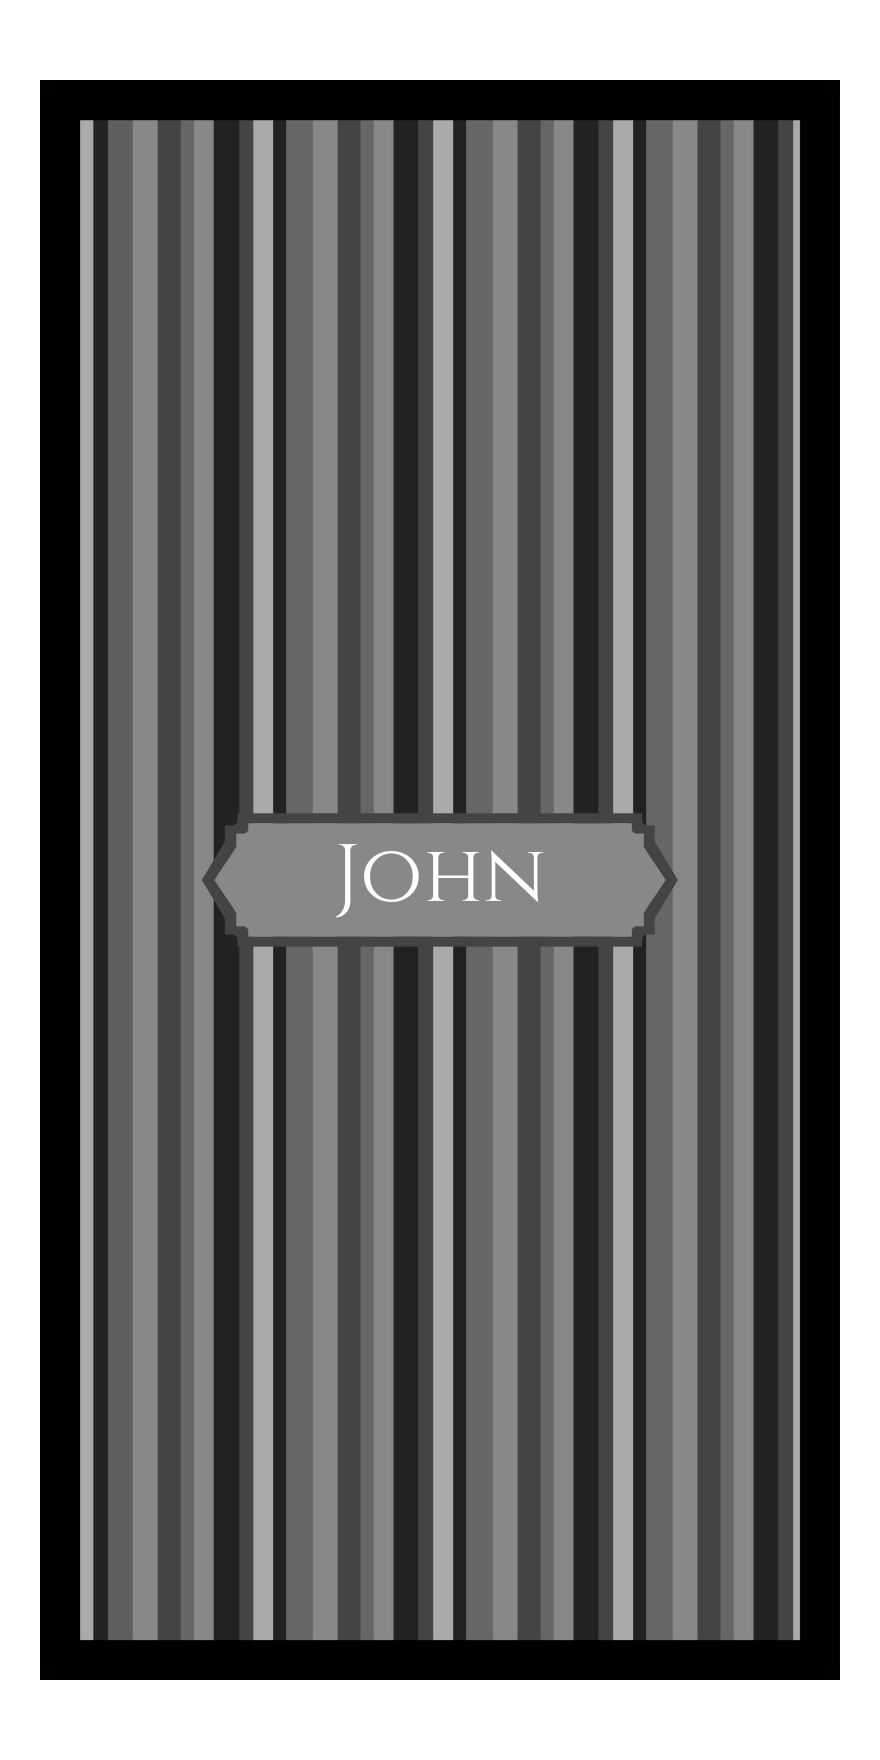 Personalized 5 Color Stripes 4 Repeat Beach Towel - Vertical - Shades of Grey - Oblong Frame - Front View